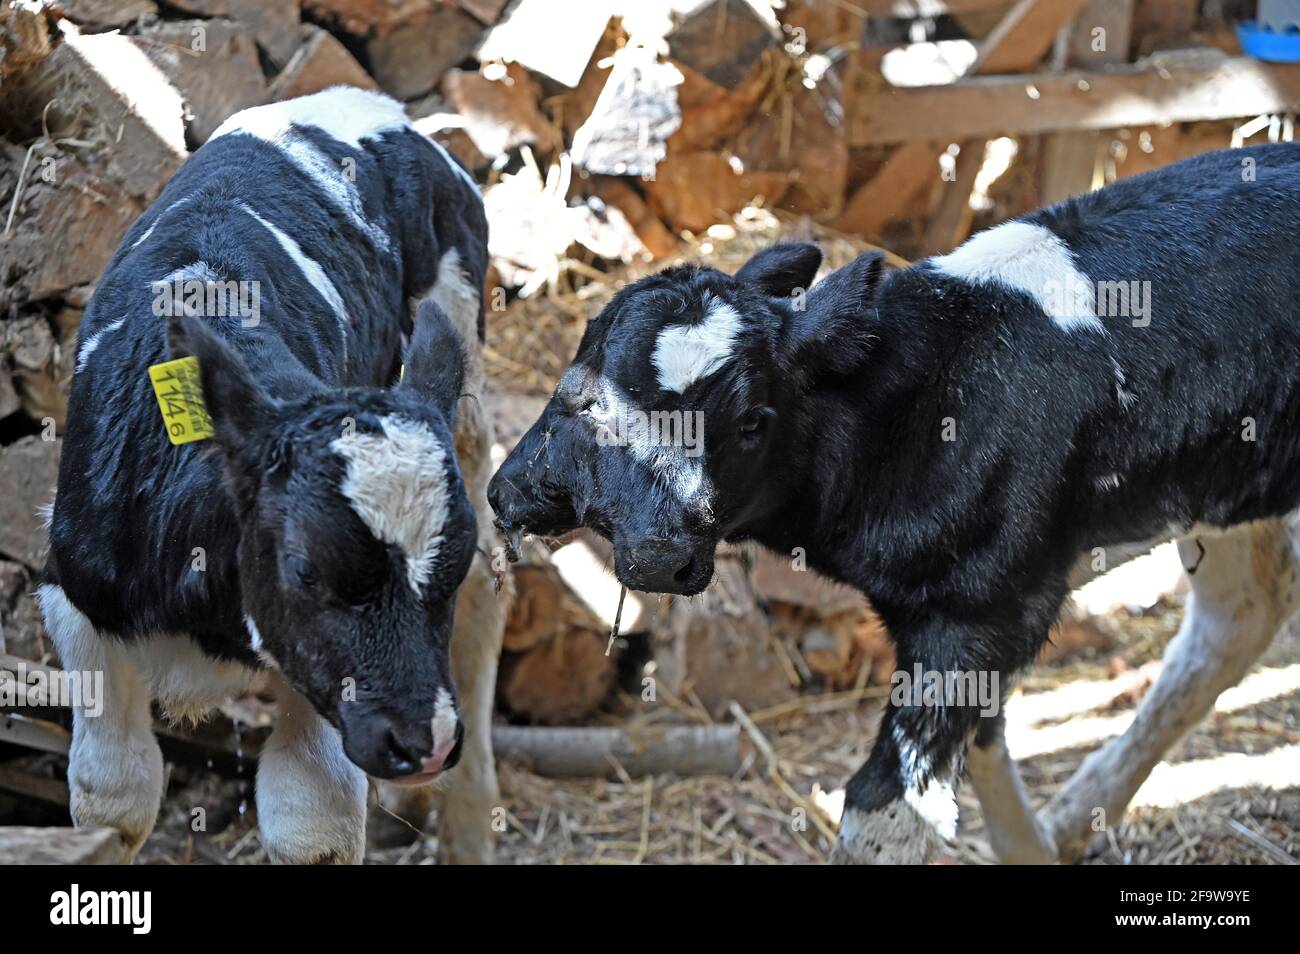 Lazec, North Macedonia. 20th Apr, 2021. A two-headed calf (R) is seen at a barn in Lazec, North Macedonia, on April 20, 2021. The young calf has fused skulls, two pairs of eyes, two mouths and two ears. It breathes regularly, sucks milk and slowly straightens her legs. Credit: Tomislav Georgiev/Xinhua/Alamy Live News Stock Photo